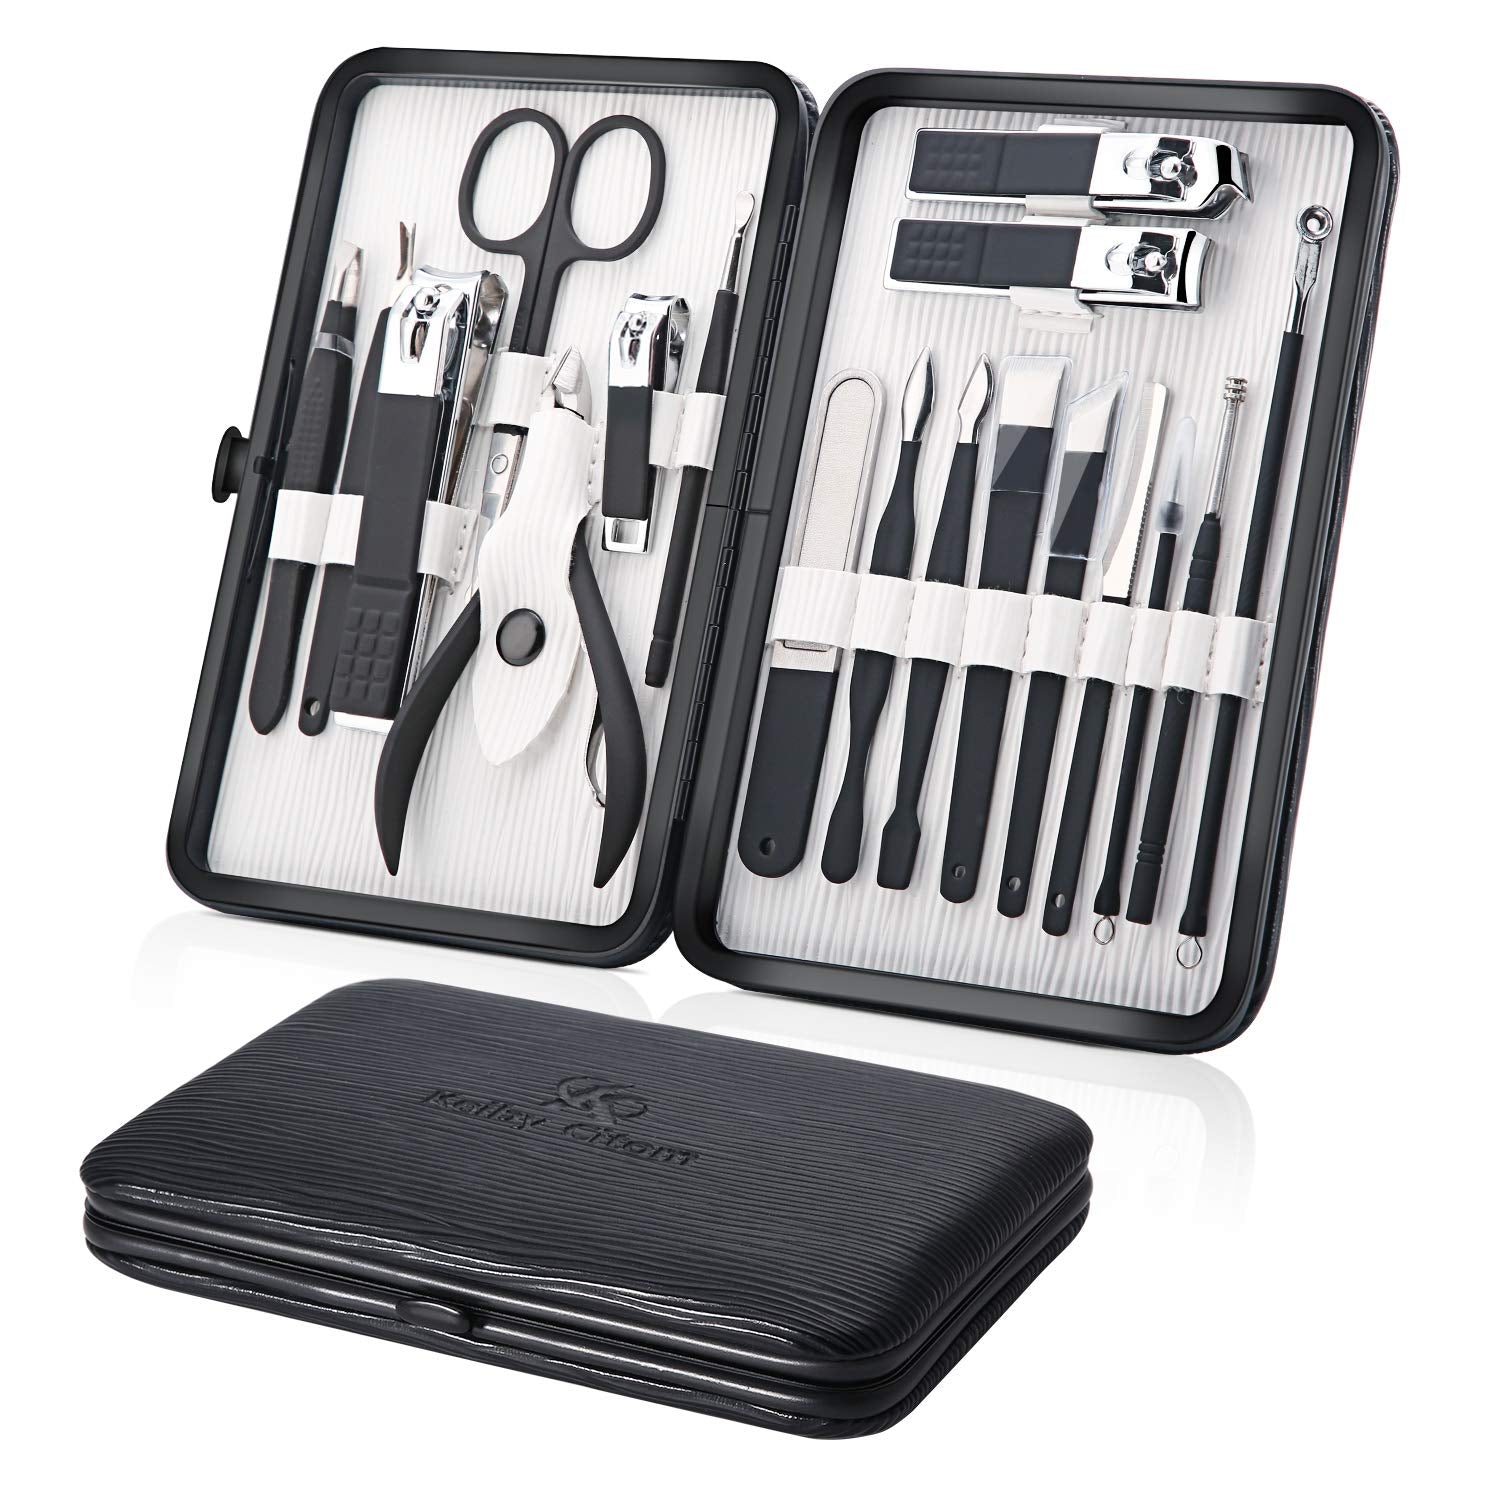 Keiby Citom Professional Stainless Steel Nail Clipper Travel & Grooming Kit Nail Tools Manicure & Pedicure Set of 18Pcs with Luxurious Case (Black/Blue)